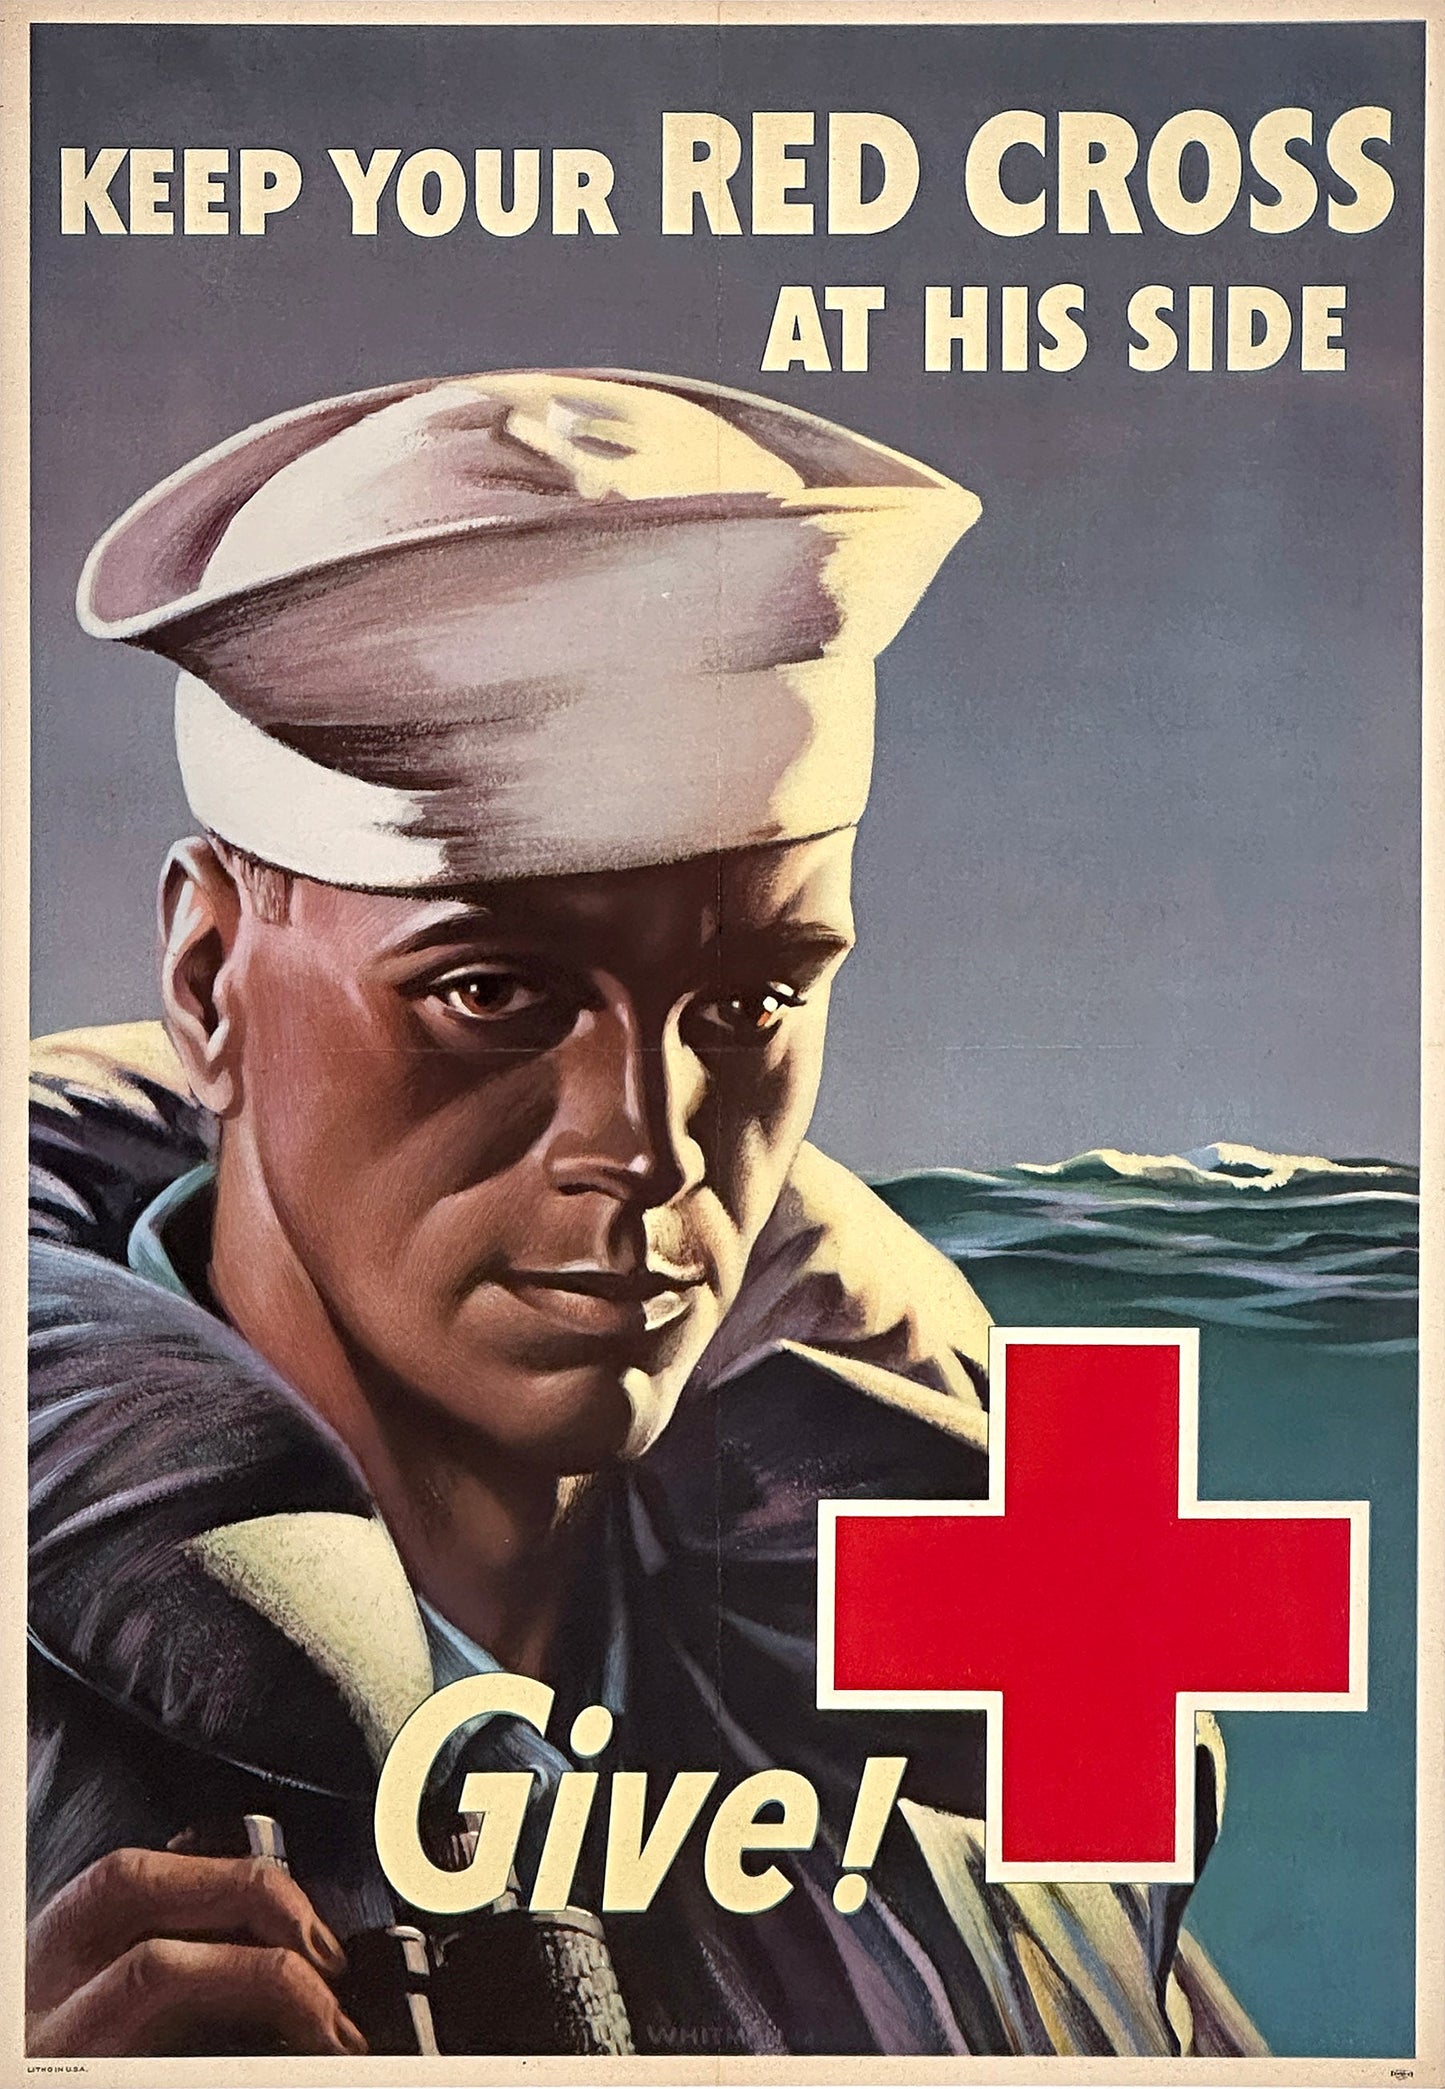 Original Vintage WWII Keep Your Red Cross at His Side Poster by John Whitman Jr. - Medium Size